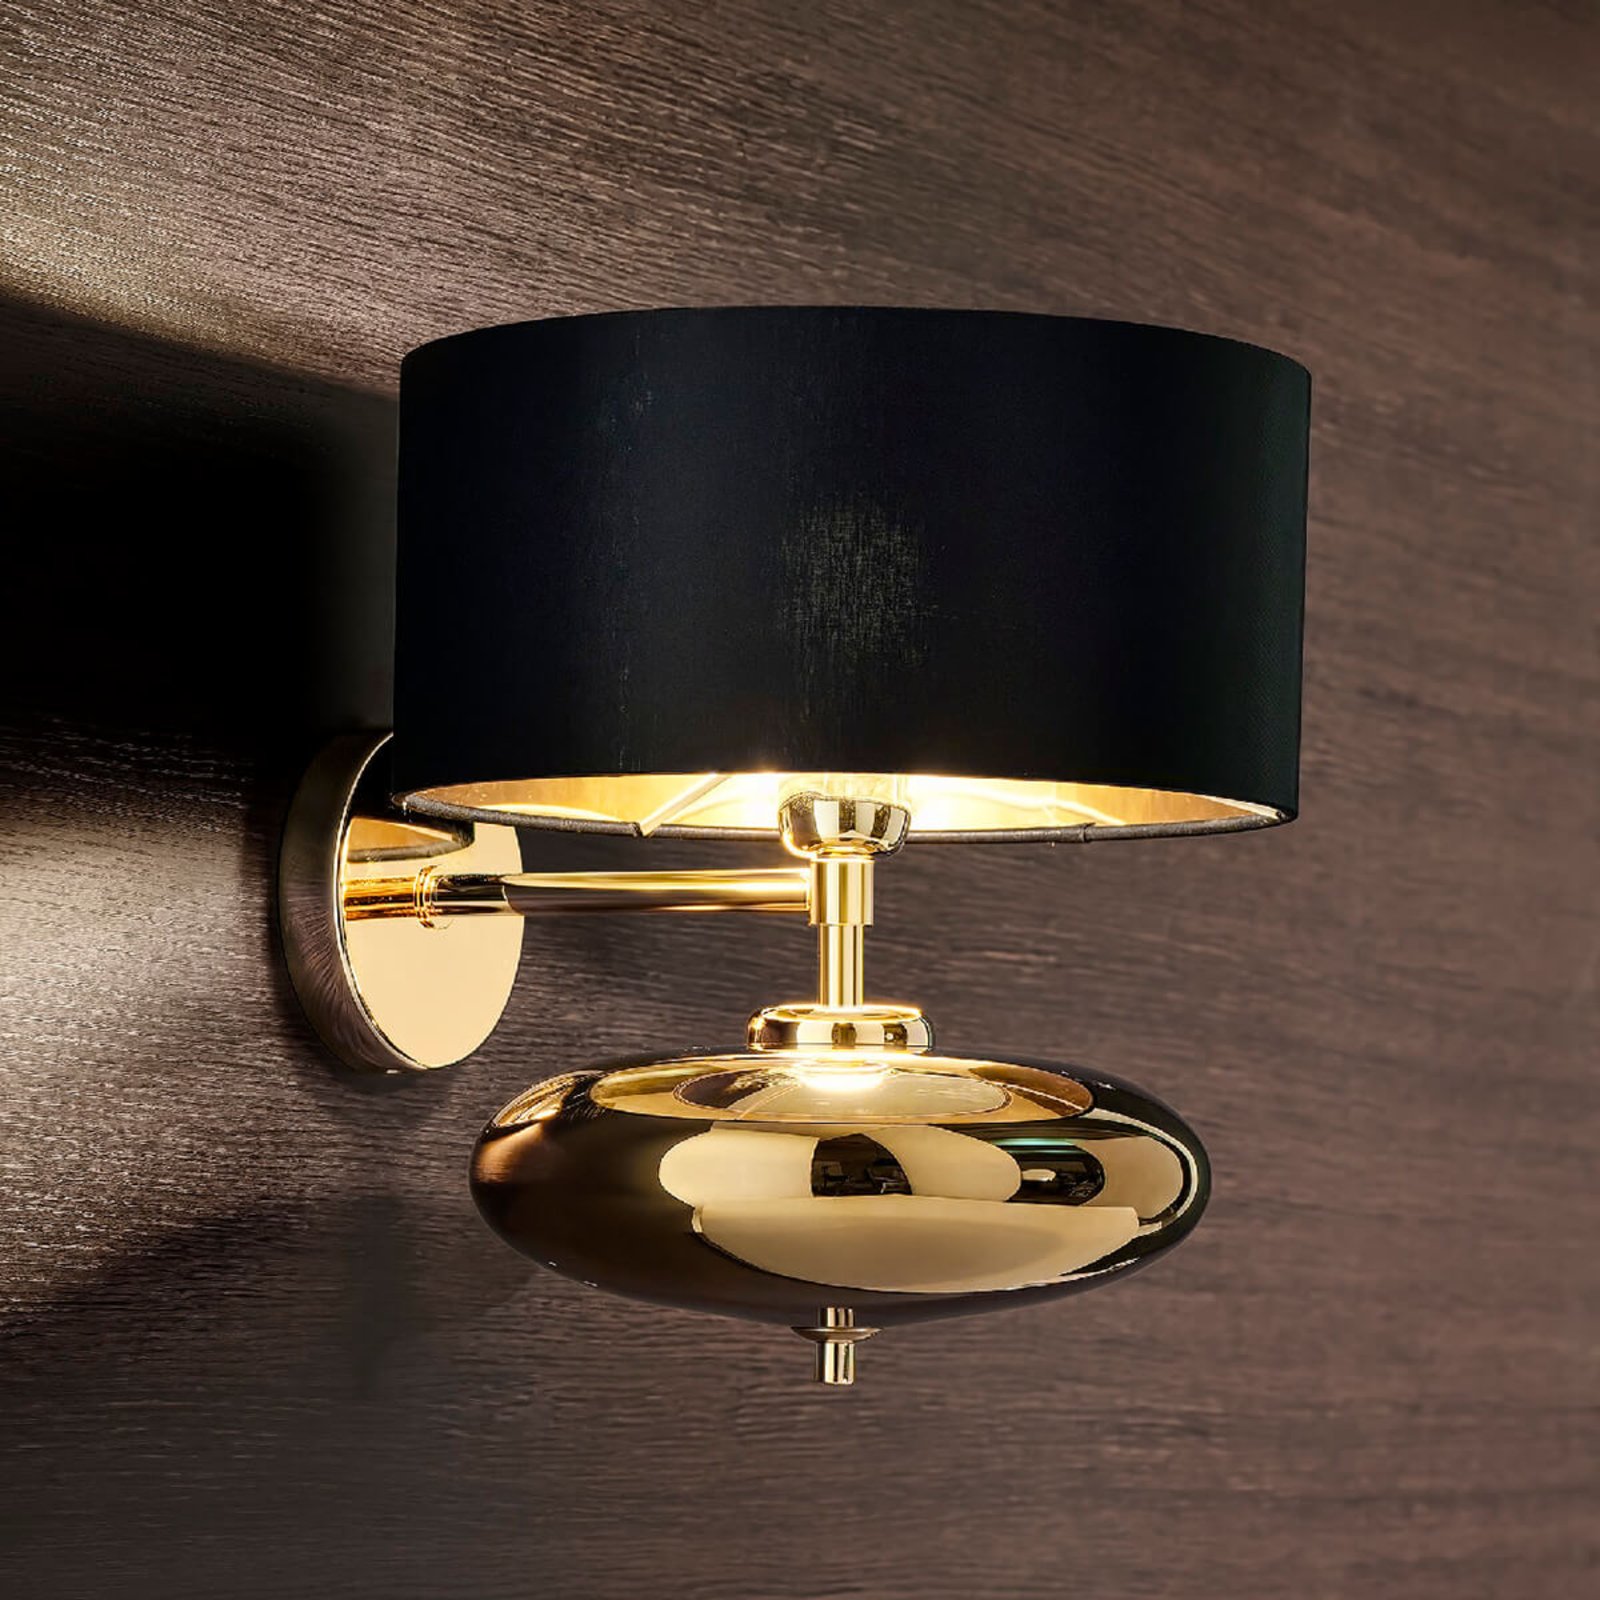 Black and gold - Show Ellisse textile wall light